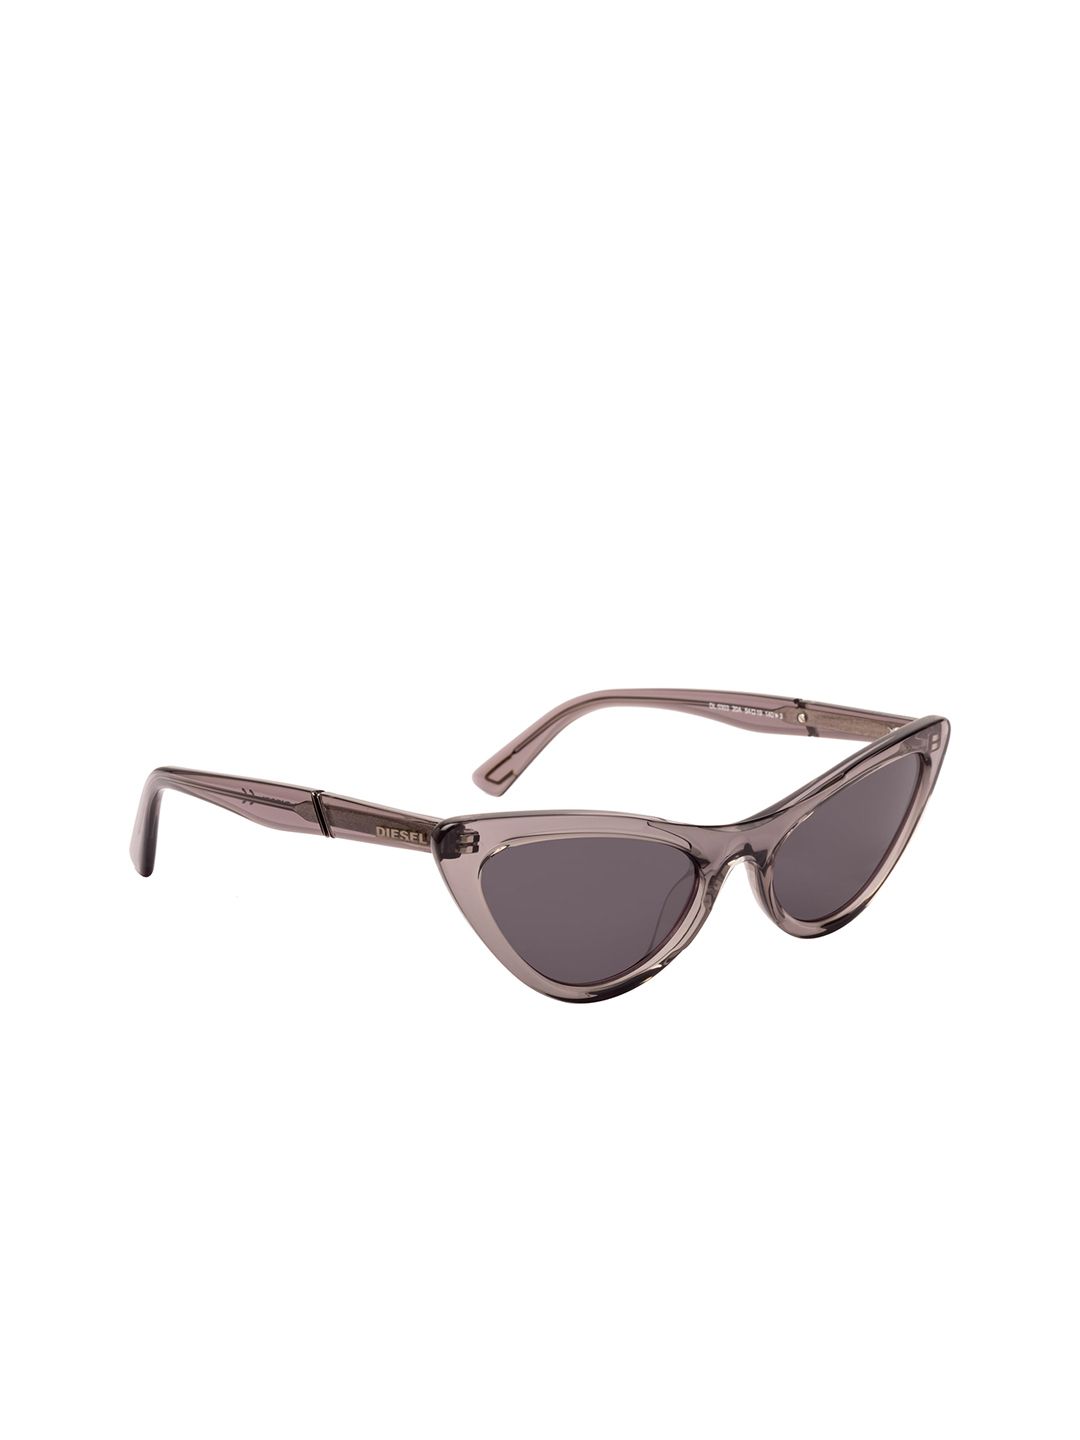 DIESEL Women Grey & Steel-Toned Cateye Sunglasses with UV Protected Lens DL0303 54 20A Price in India